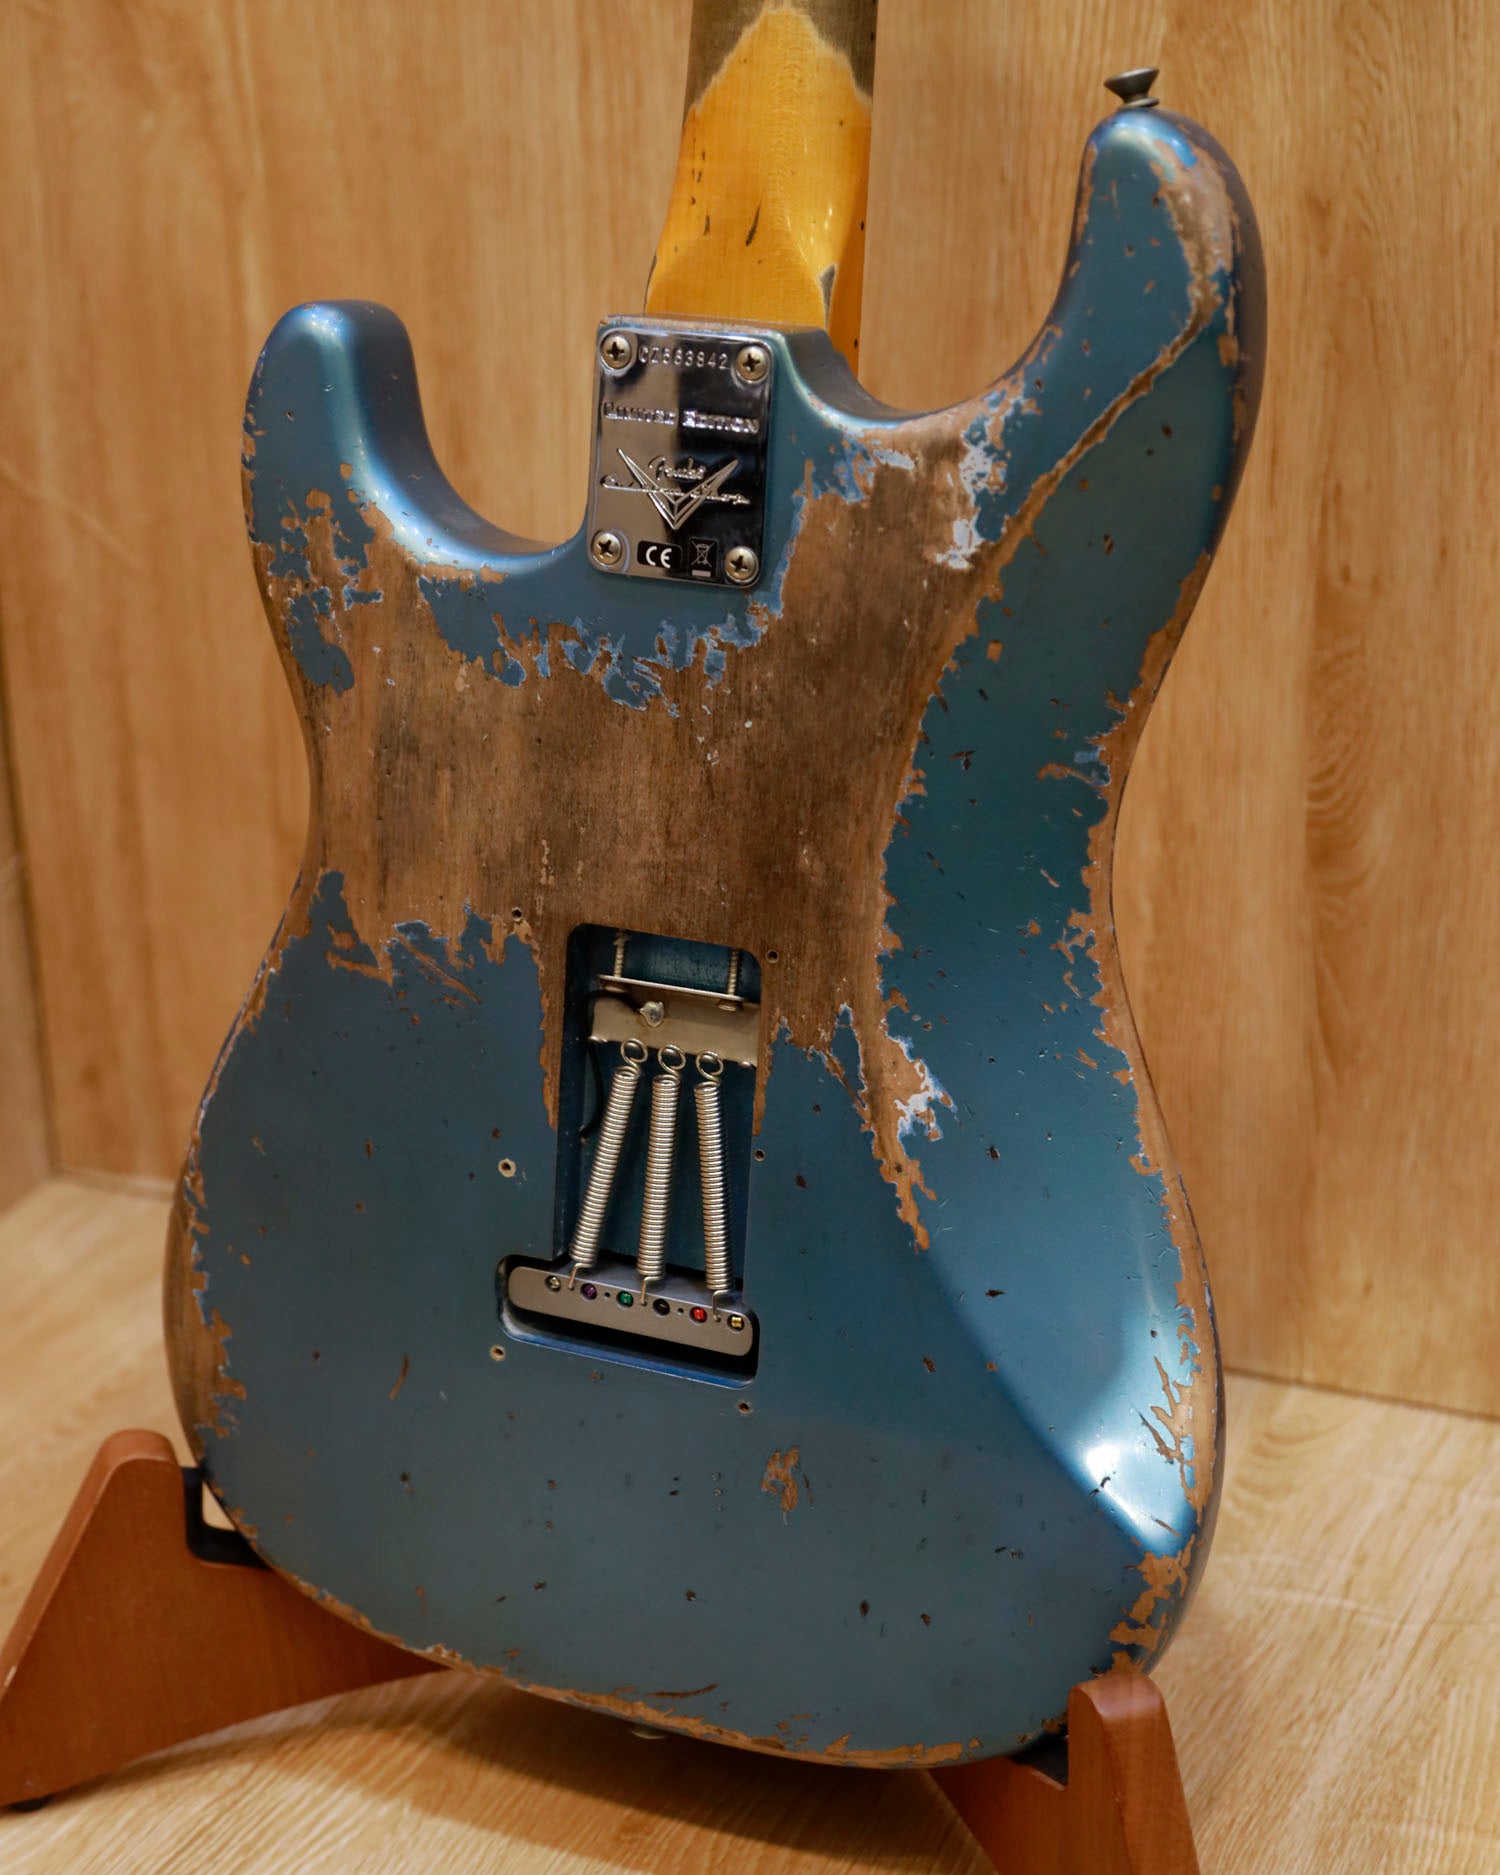 Fender Custom Limited Edition Red Hot Strat Super Heavy Relic - SFALPB (Super Faded Aged Lake Placid Blue)